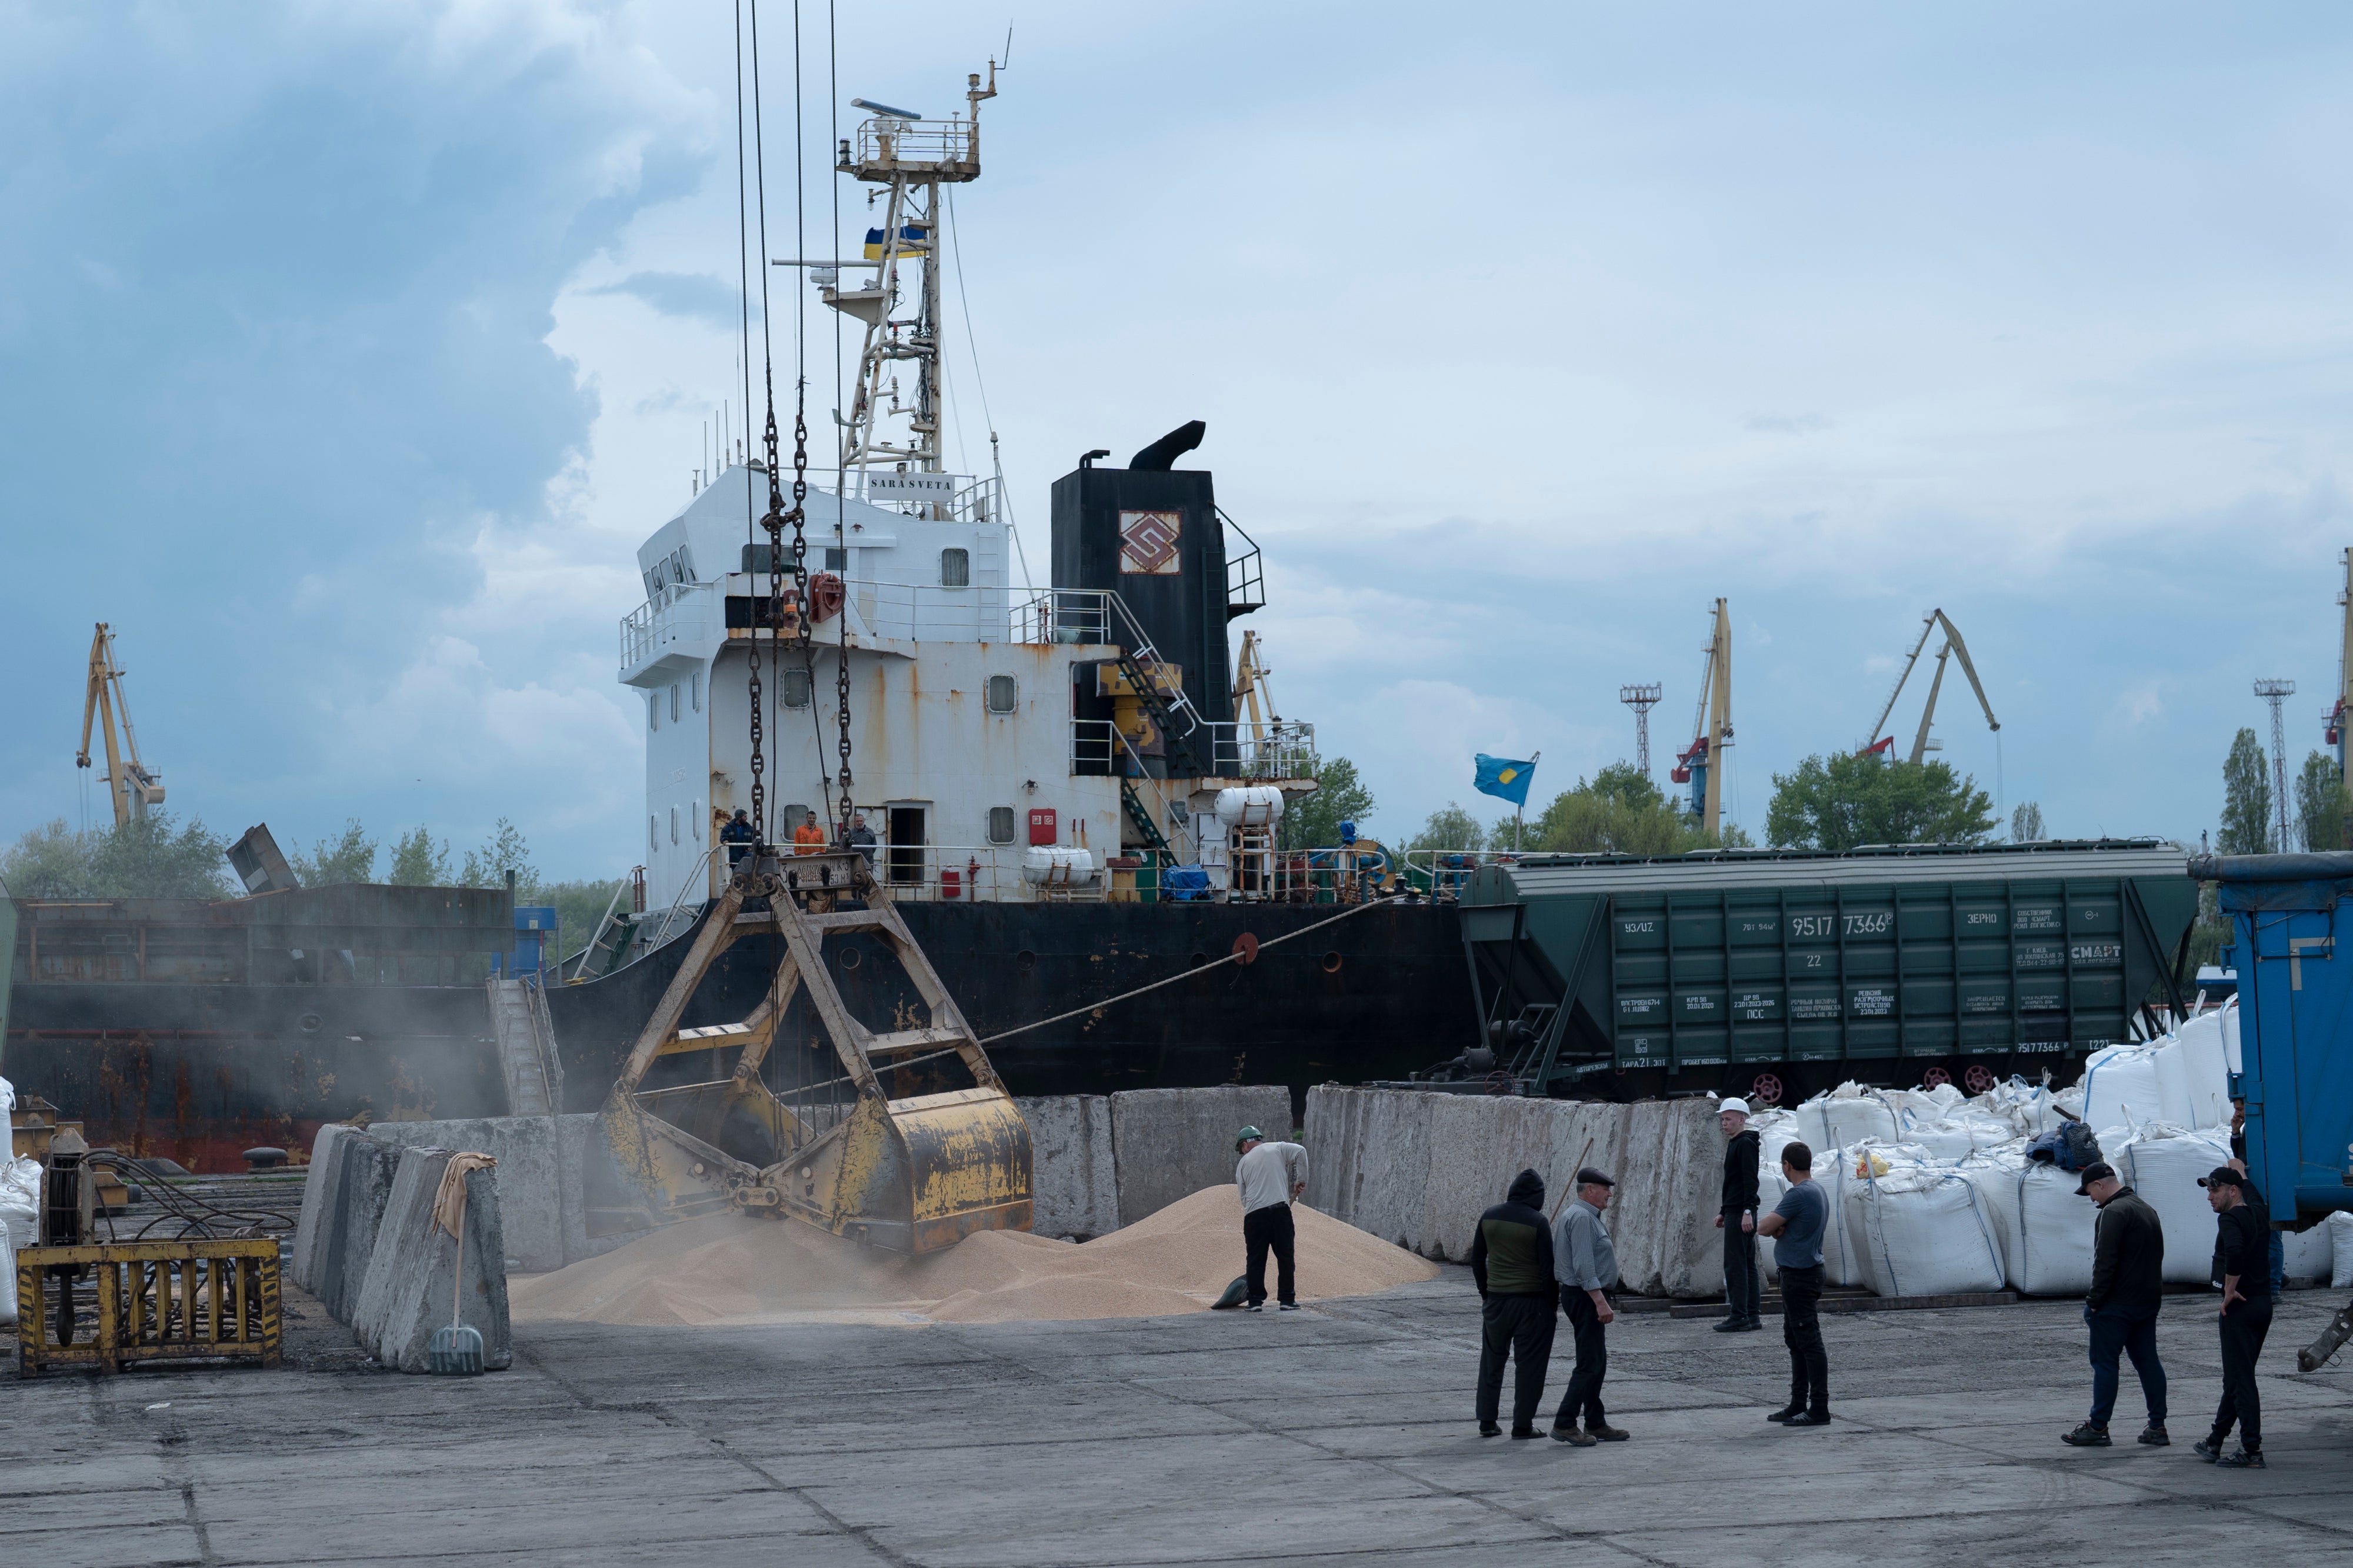 Workers load grain at a grain port in Izmail, Ukraine earlier this year